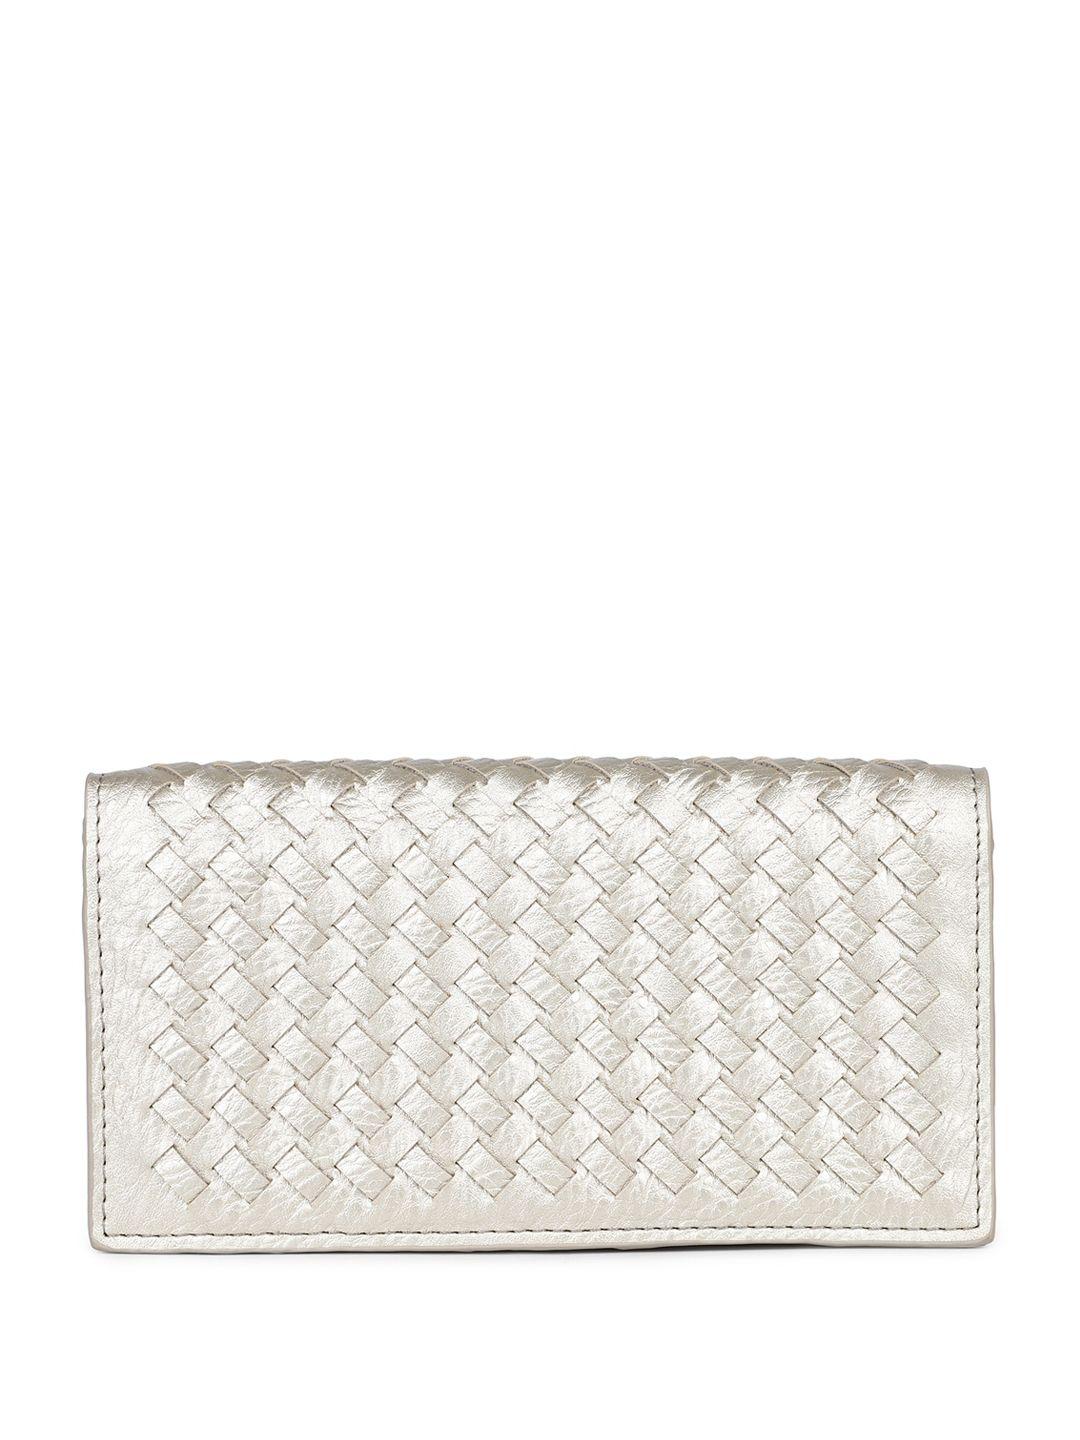 inc 5 textured synthetic leather envelope